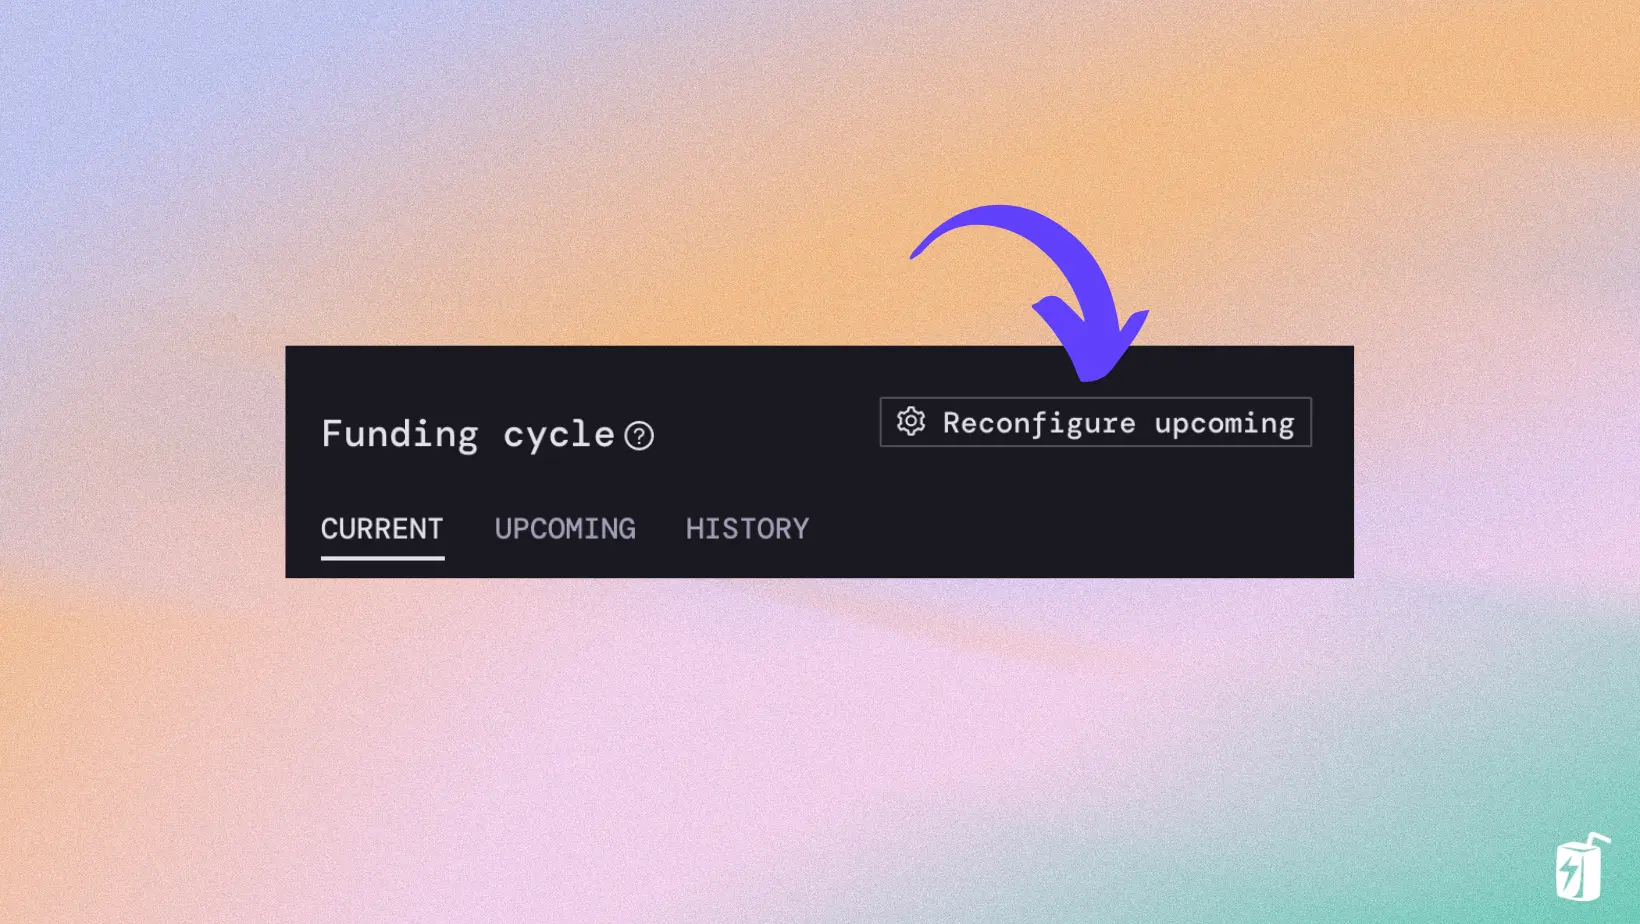 Reconfigure upcoming funding cycle